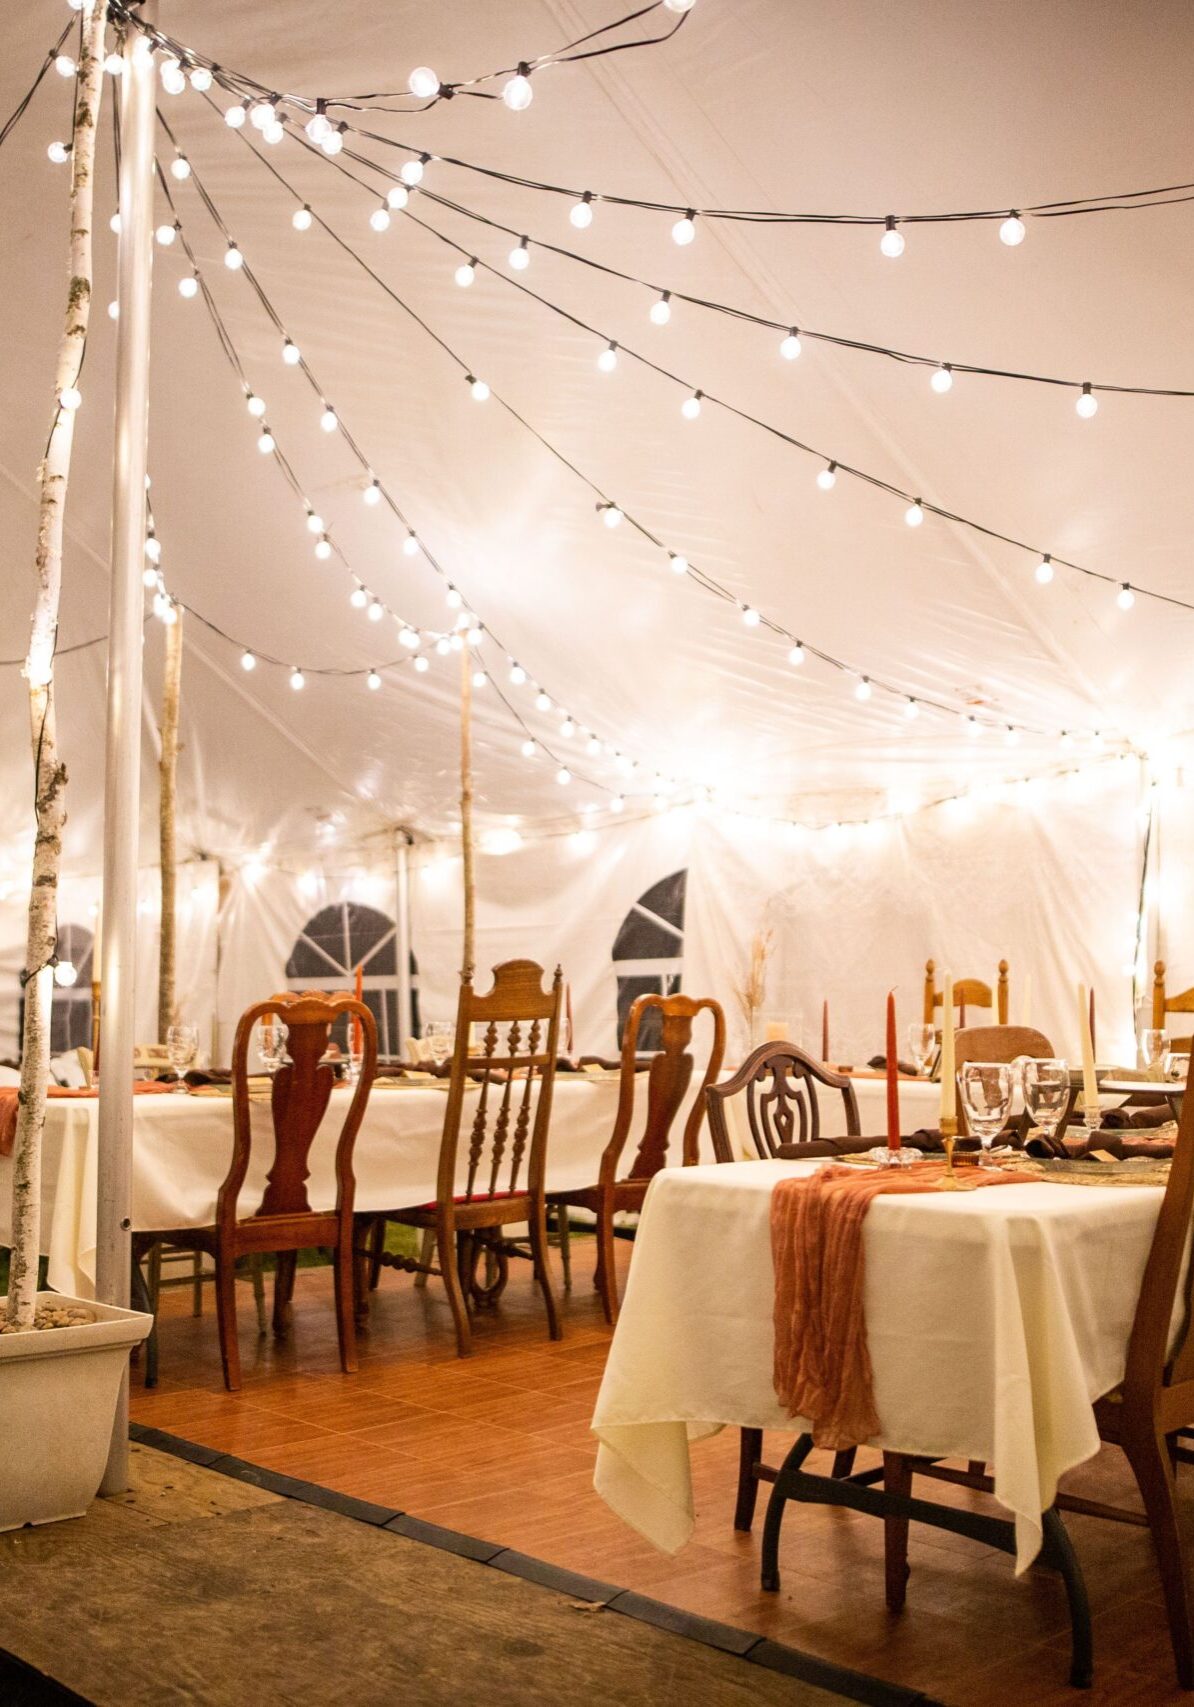 A wedding venue tent with dinner equipment on tables and string lights